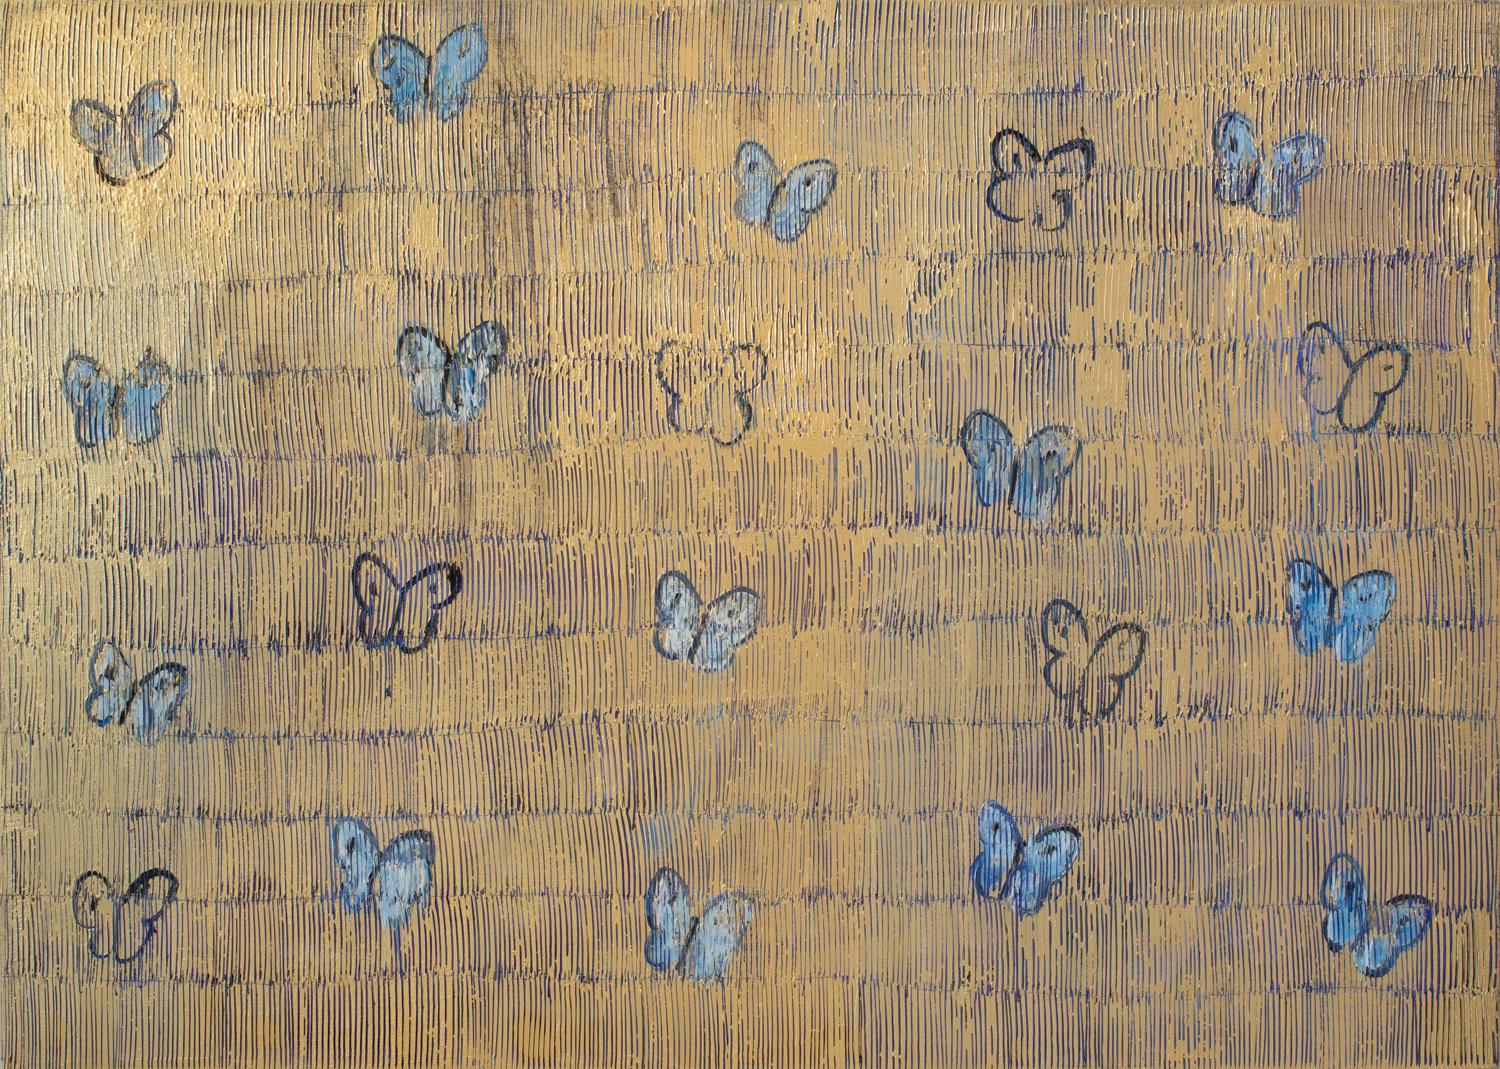 Hunt Slonem "Starry Night" Blue Butterflies
Blue butterflies on metallic gold etched background

Oil on Wood

Unframed: 50 x 70 in.

Hunt Slonem is a well-renowned American artist is known for his neo-expressionist paintings of butterflies, rabbits,